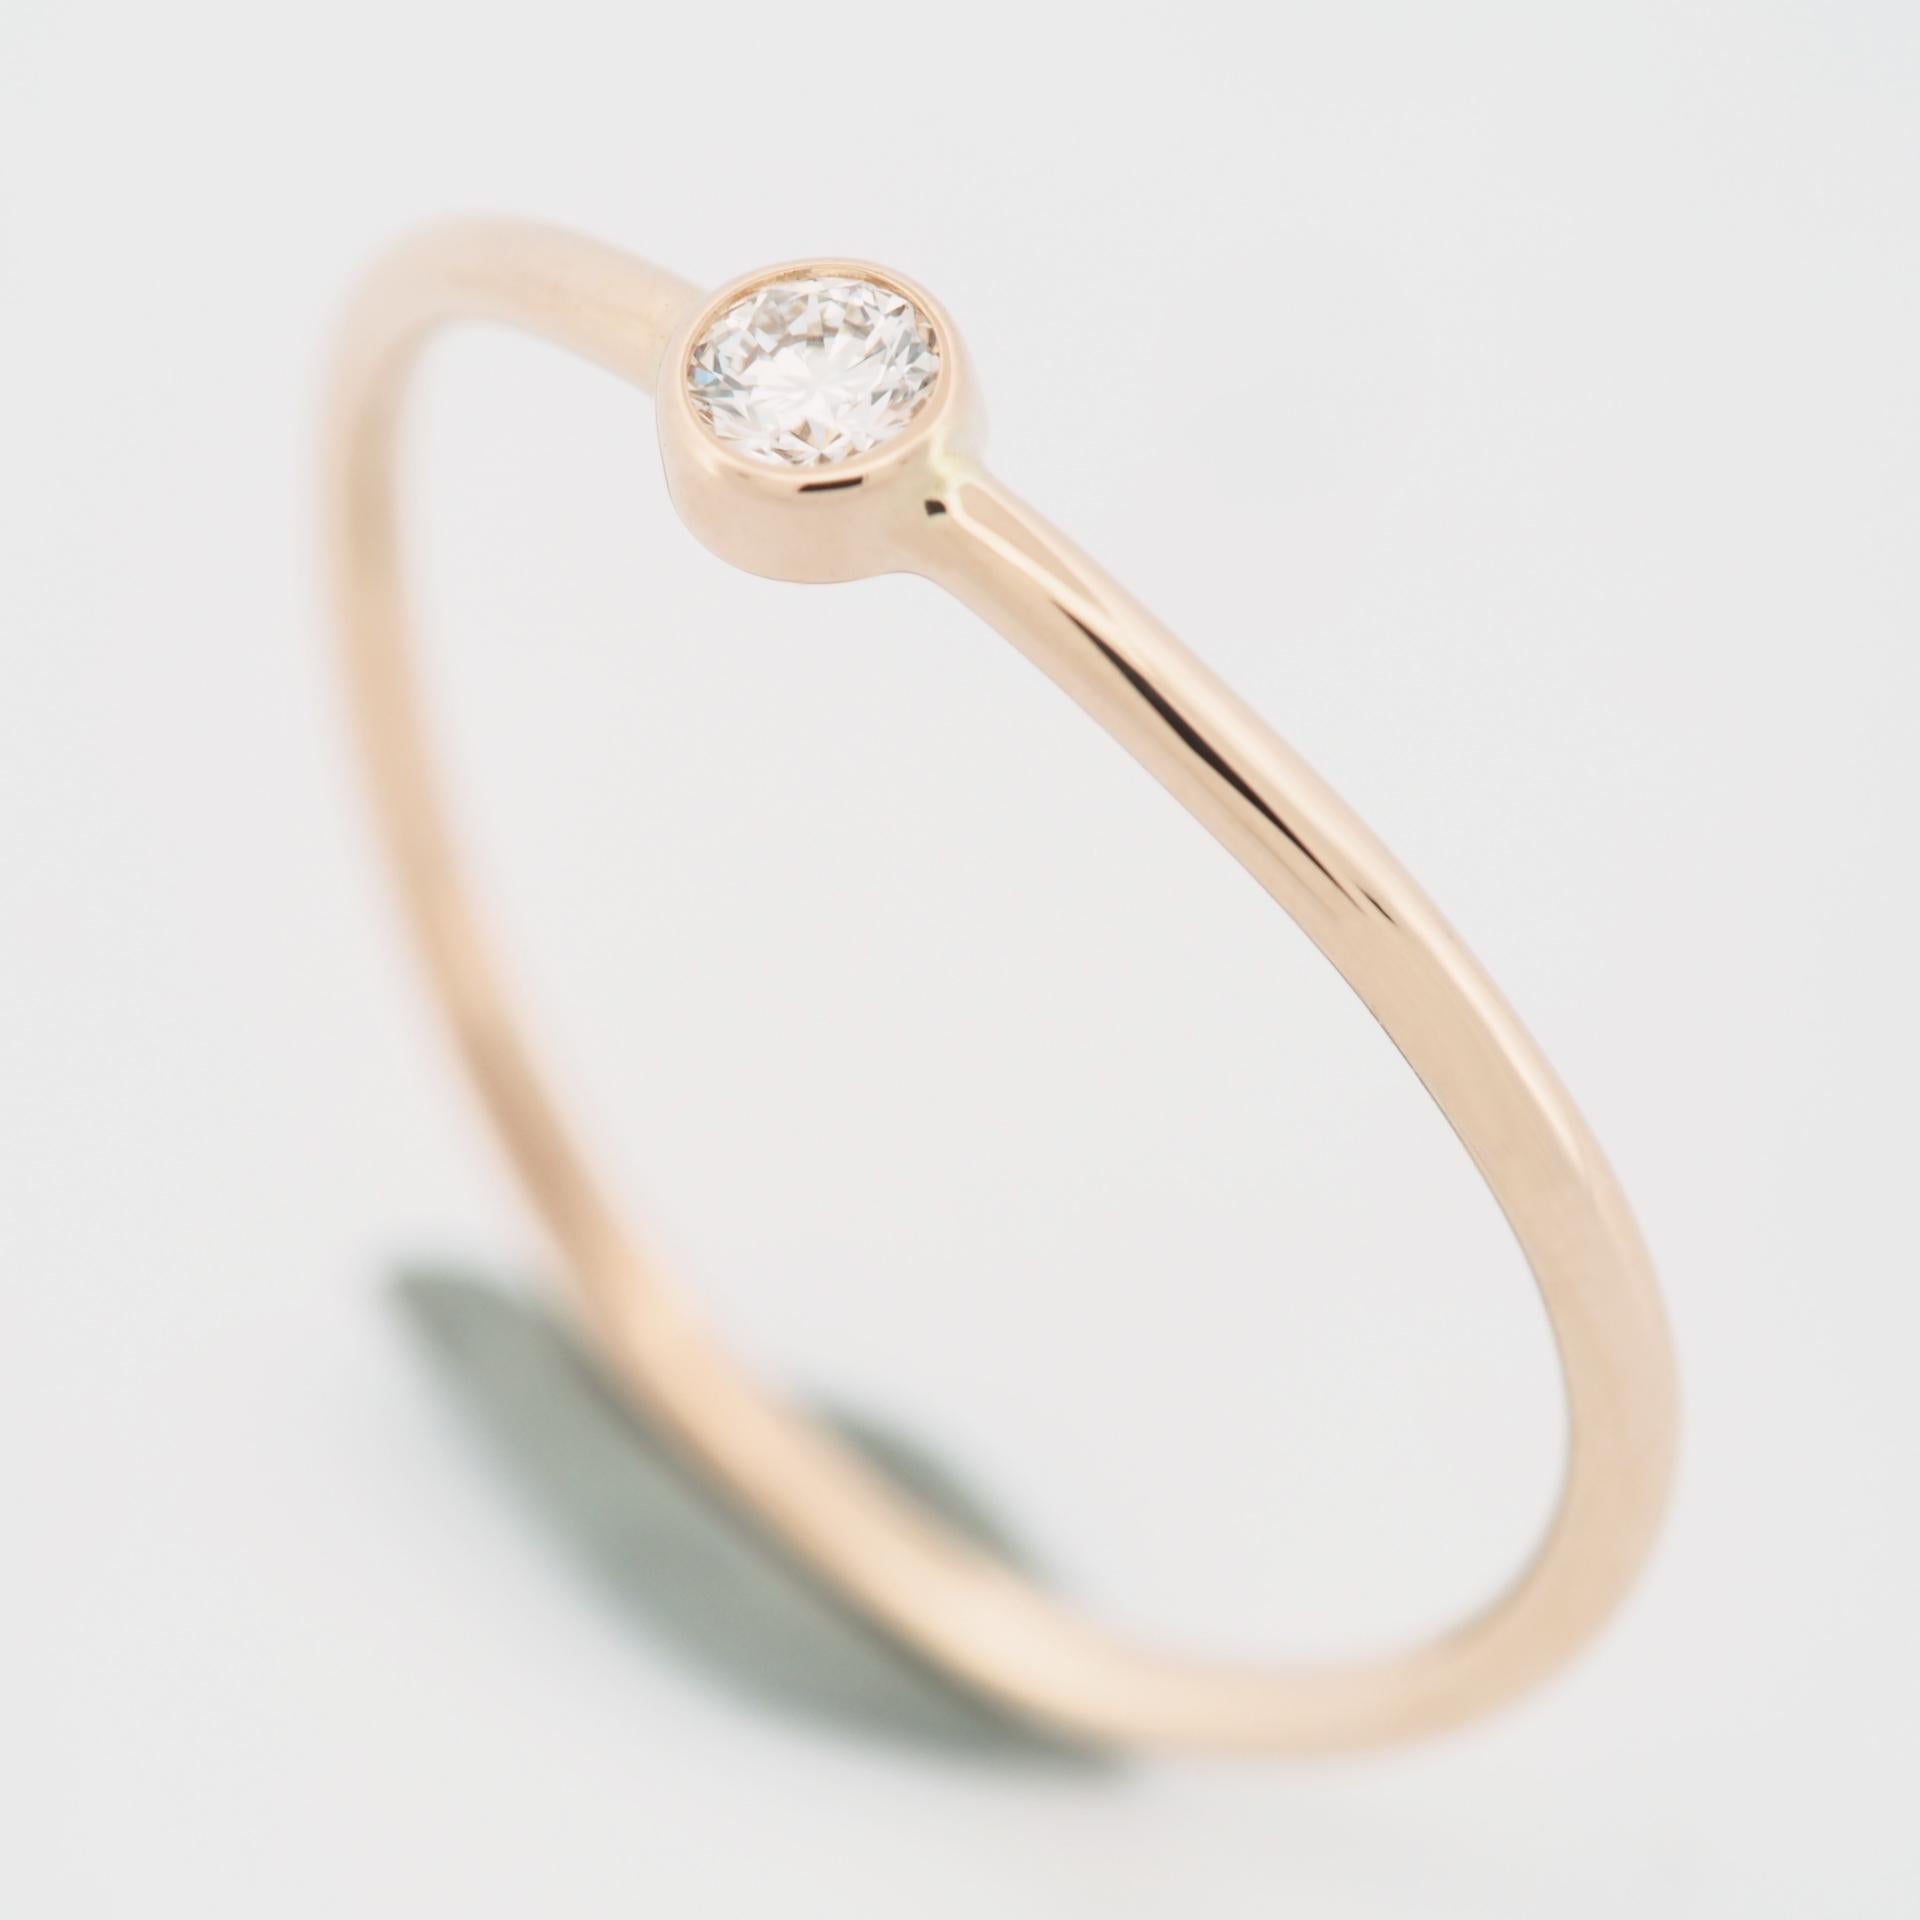 Item: Tiffany Peretti Wave Single Row Diamond Ring
Stones: Diamond (0.06ct)
Metal: 18K Rose Gold
Ring Size: US SIZE 6.25 UK SIZE L 3/4
Internal Diameter: 16.75 mm
Measurements: 1.1 - 3.3 mm
Weight: 1.0 Grams
Condition: Used (repolished)
Retail